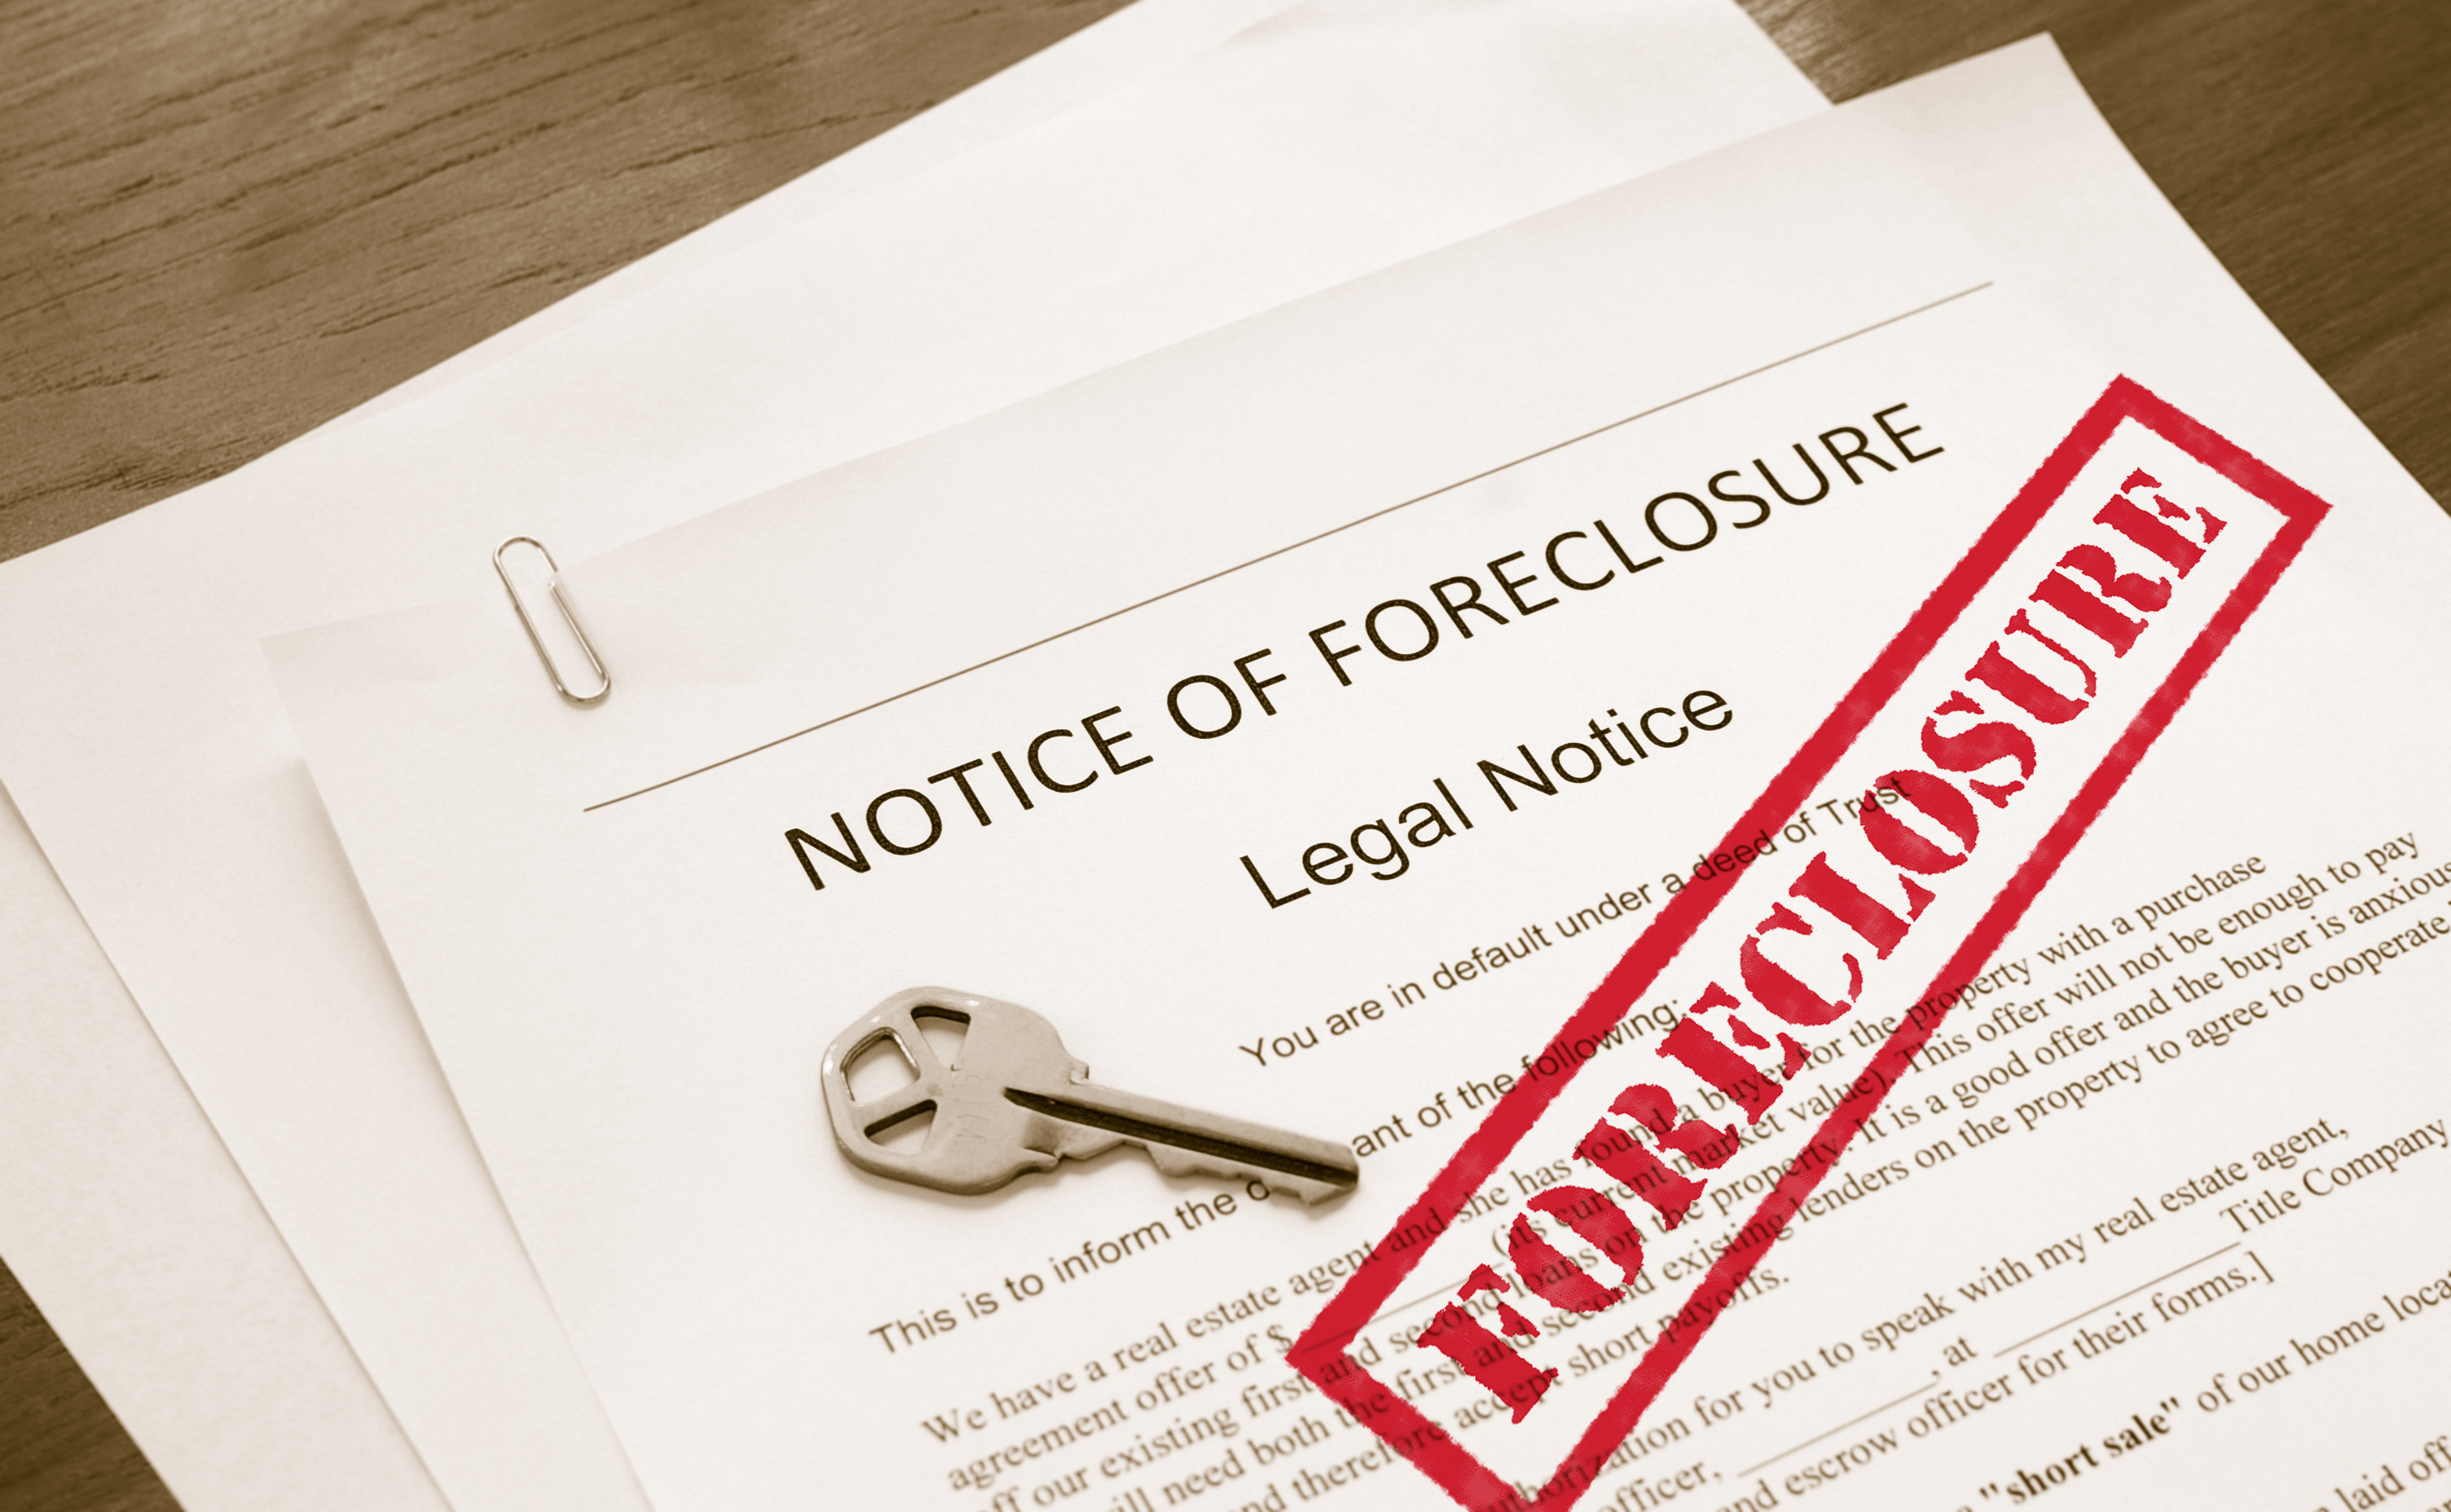 What should you include on a foreclosure letter template?